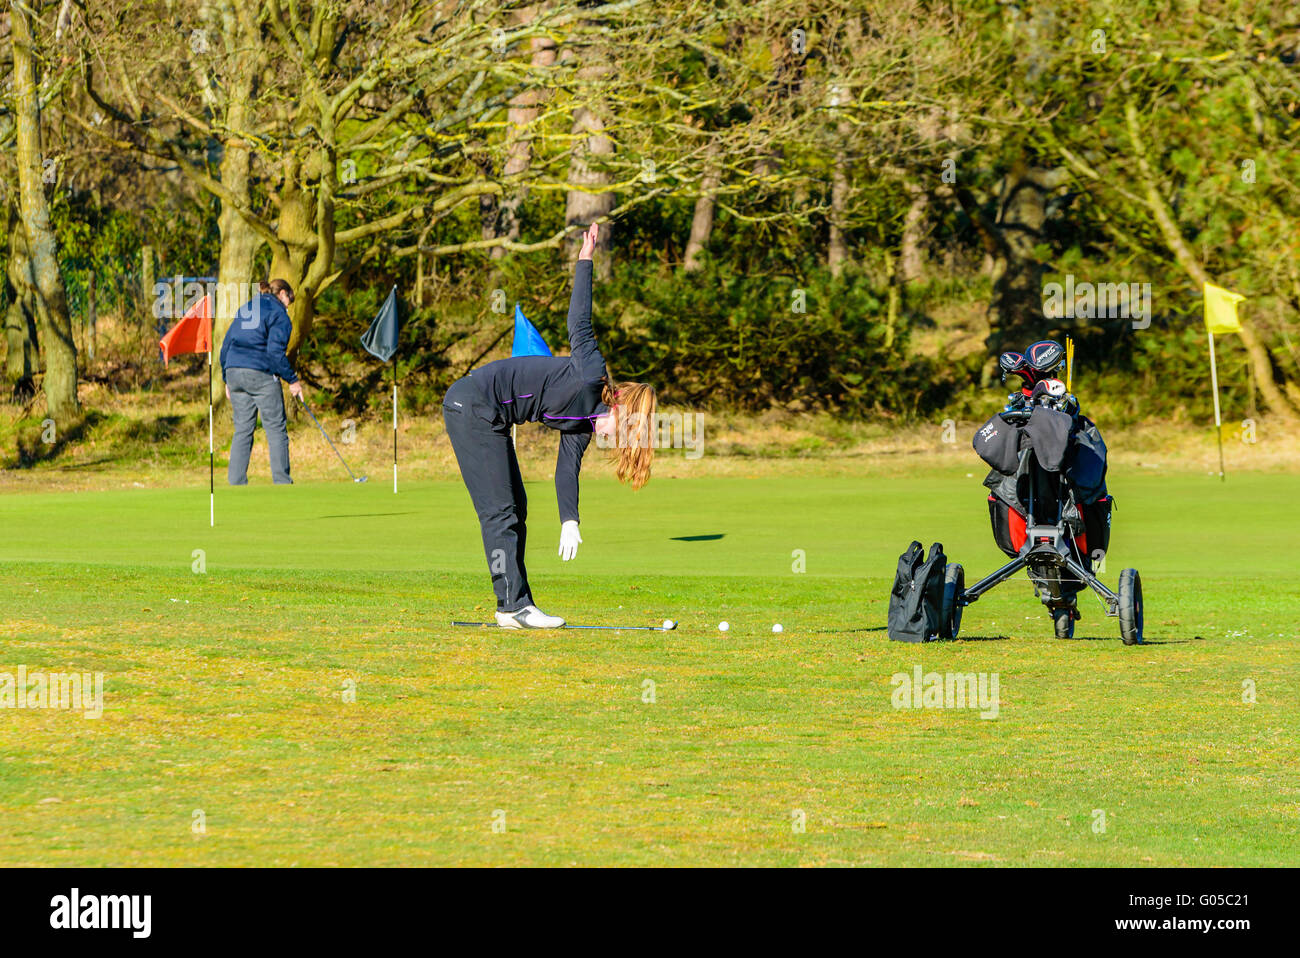 Falsterbo, Sweden - April 11, 2016: Young adult female golfer warming up before starting her round. Here seen doing stretch exer Stock Photo